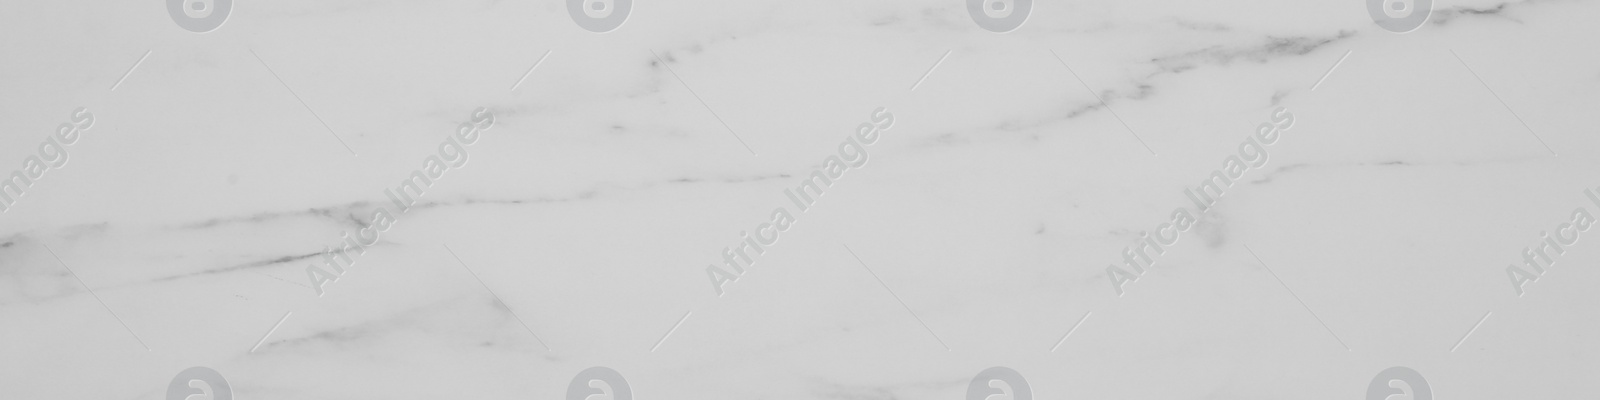 Image of Texture of white marble surface as background, closeup. Banner design